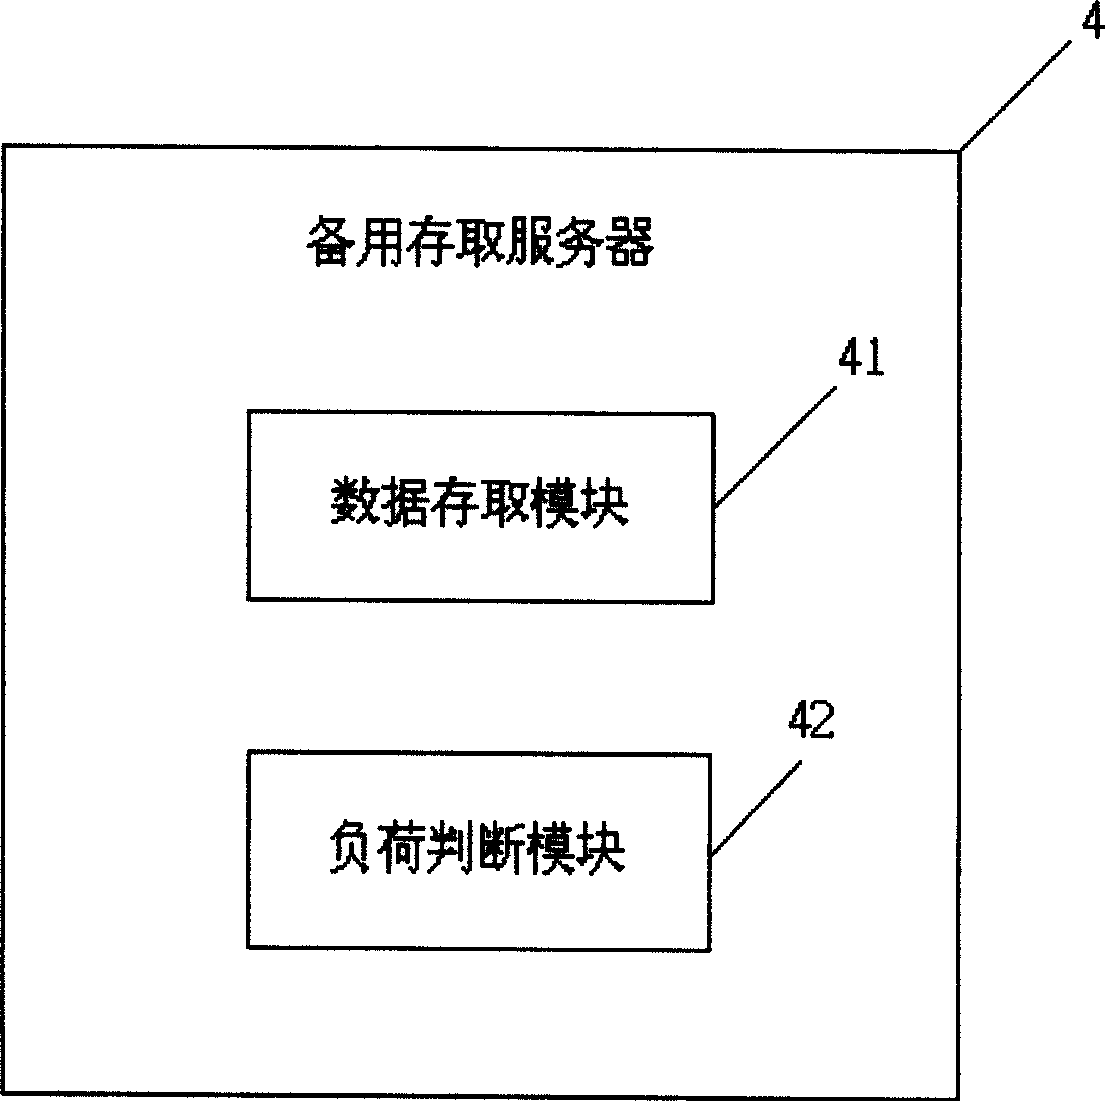 Sheet-metal piece engineering design management system and method